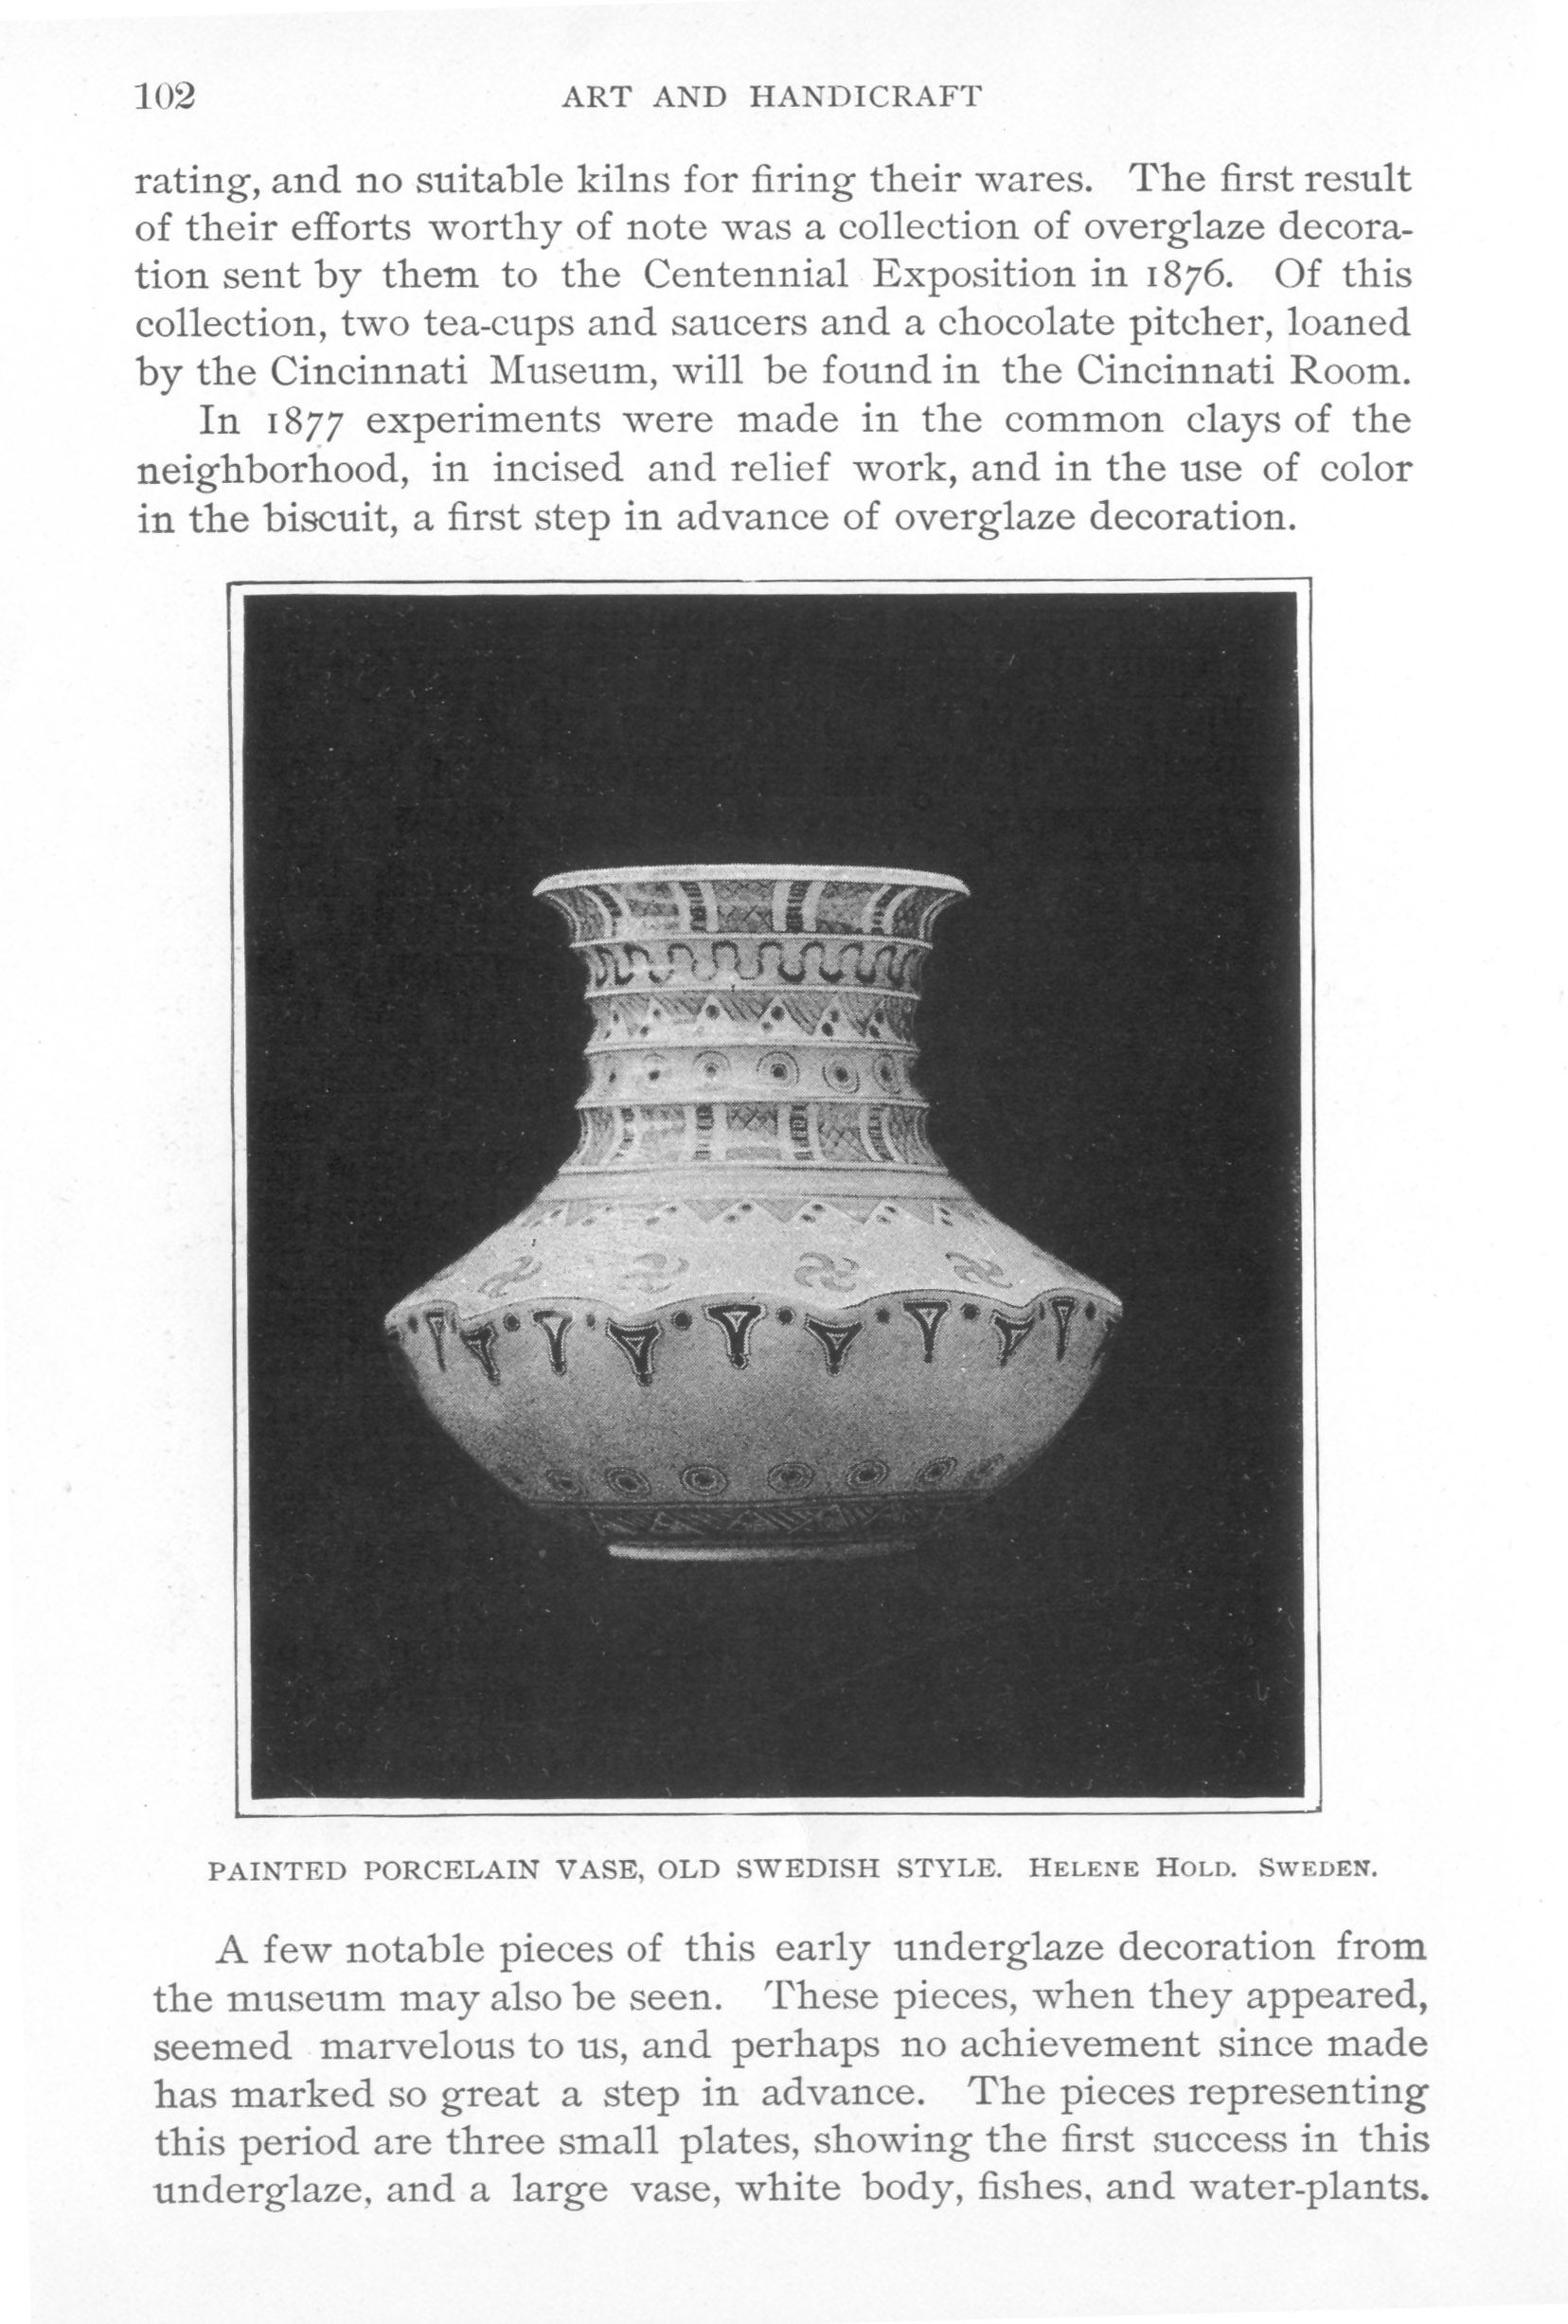 vase with tiered geometric design